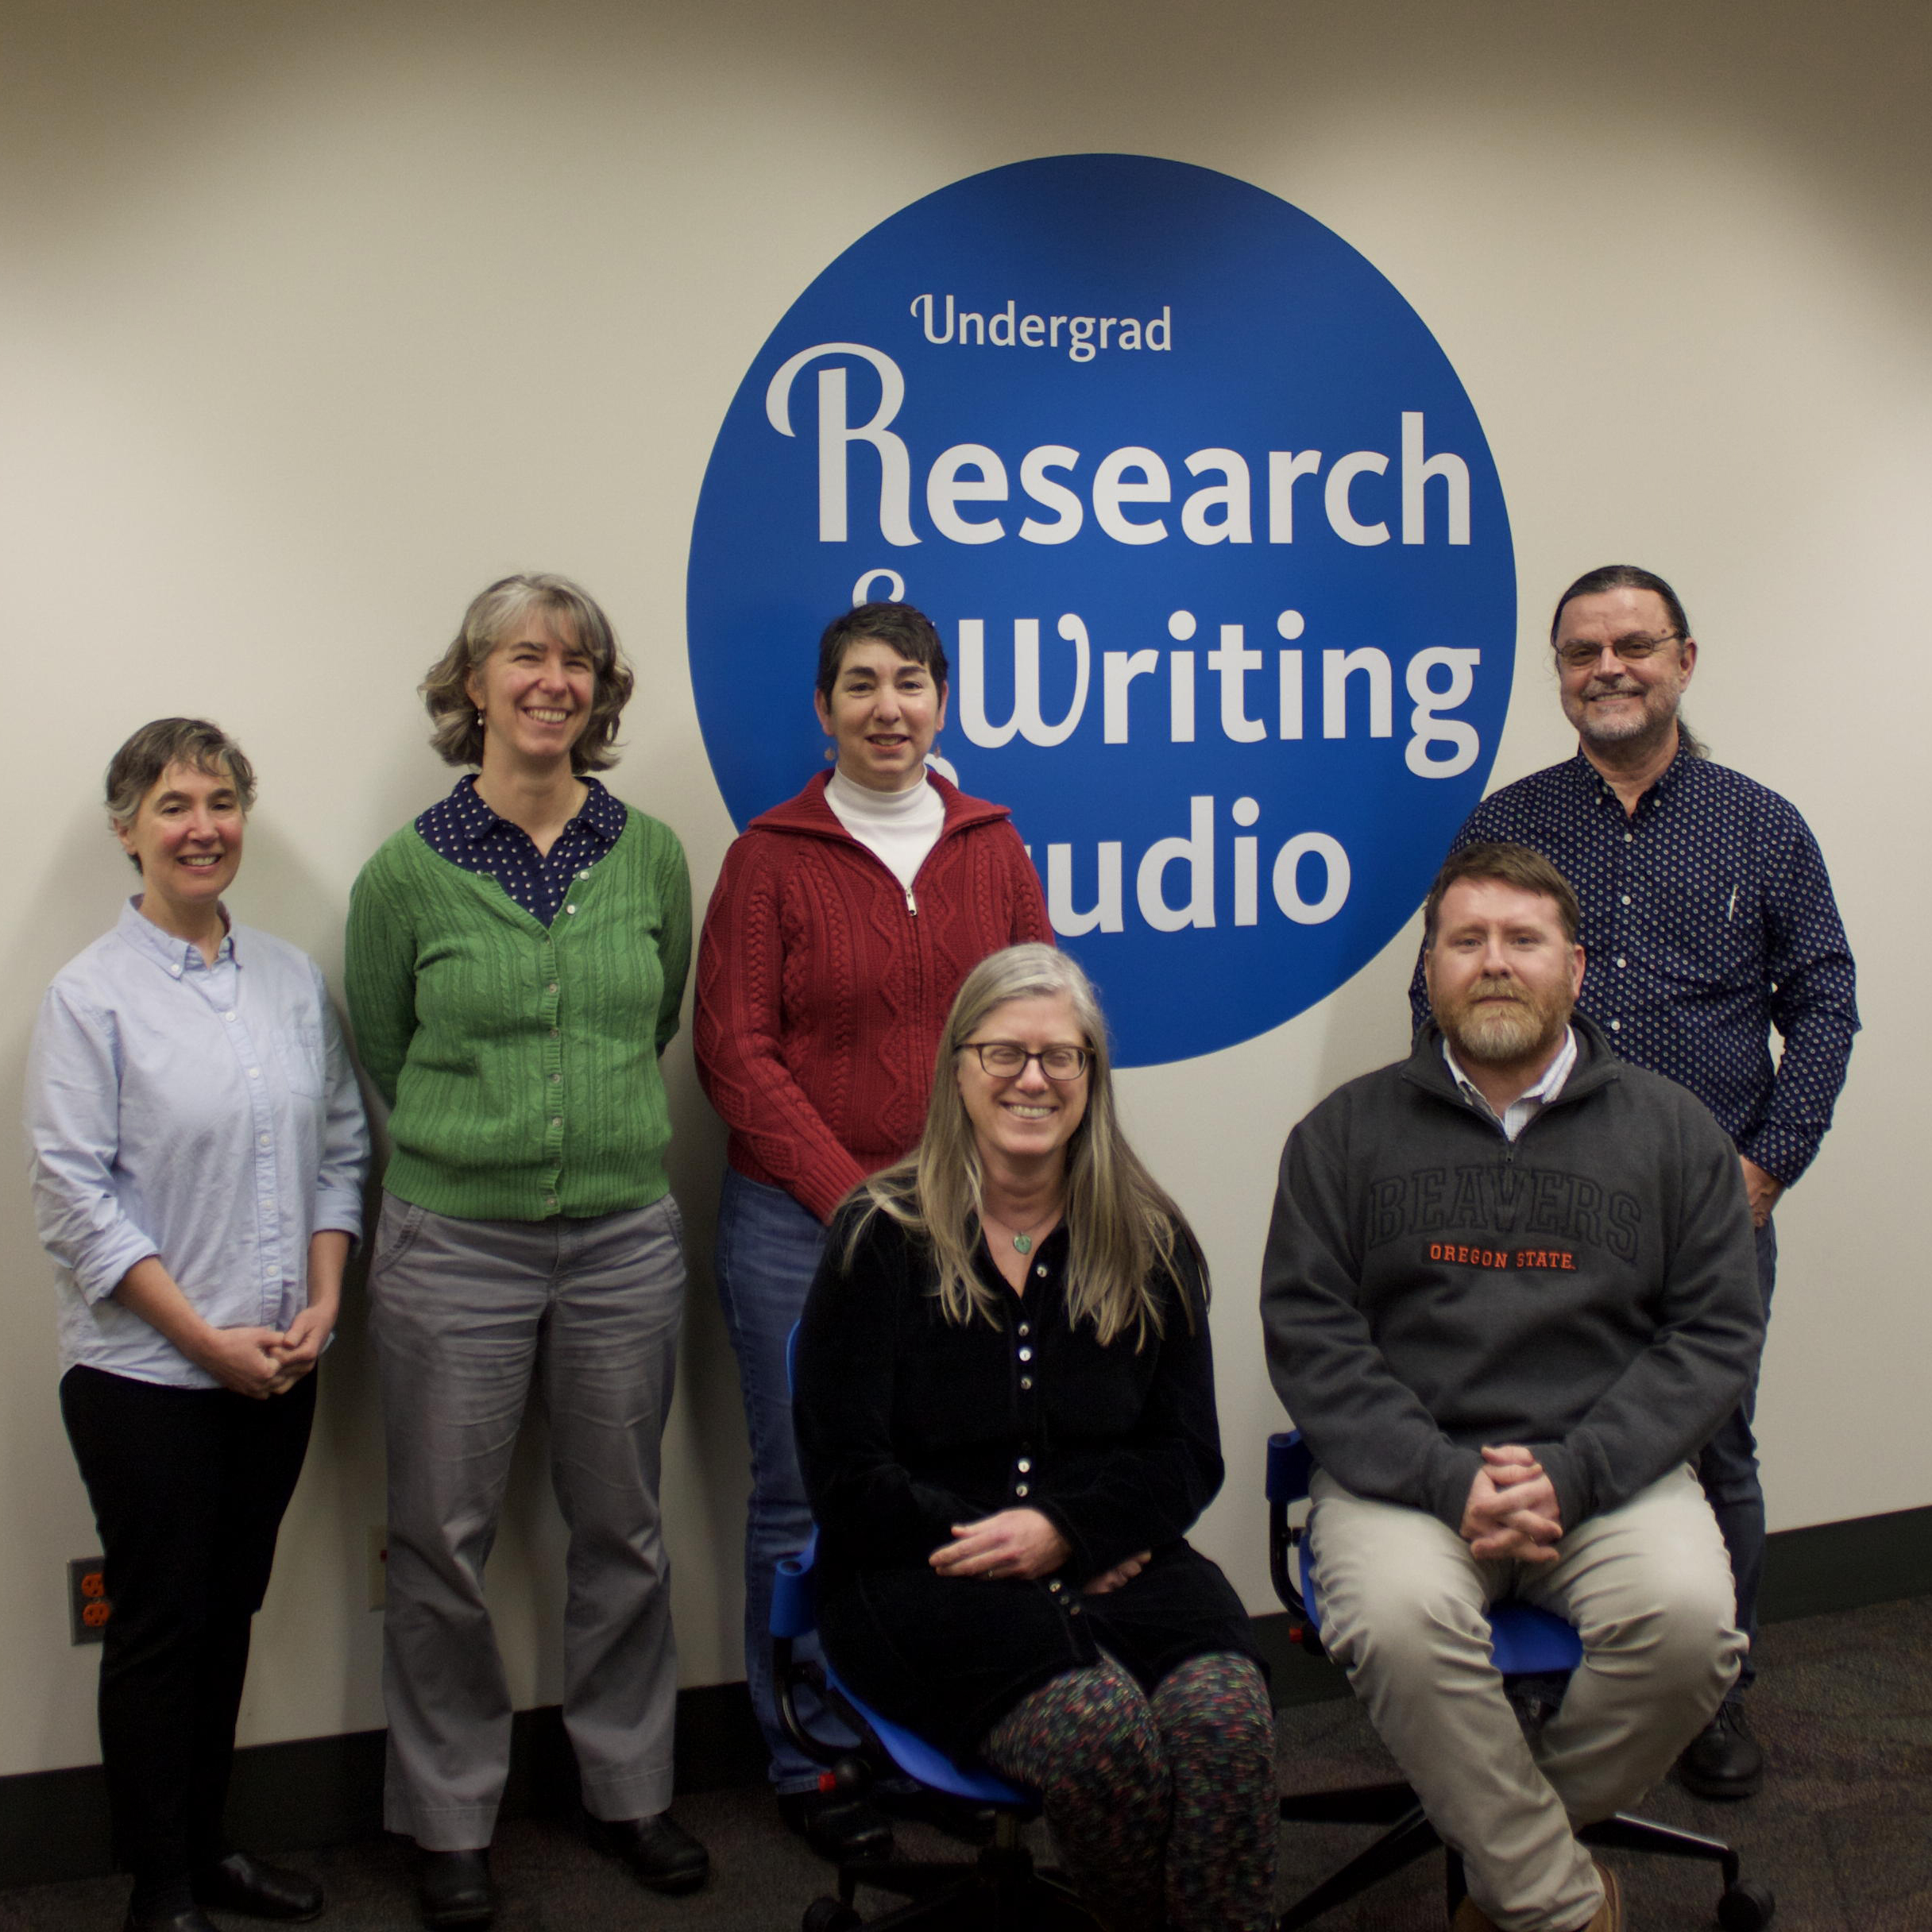 Undergrad Research and Writing Studio Awardees